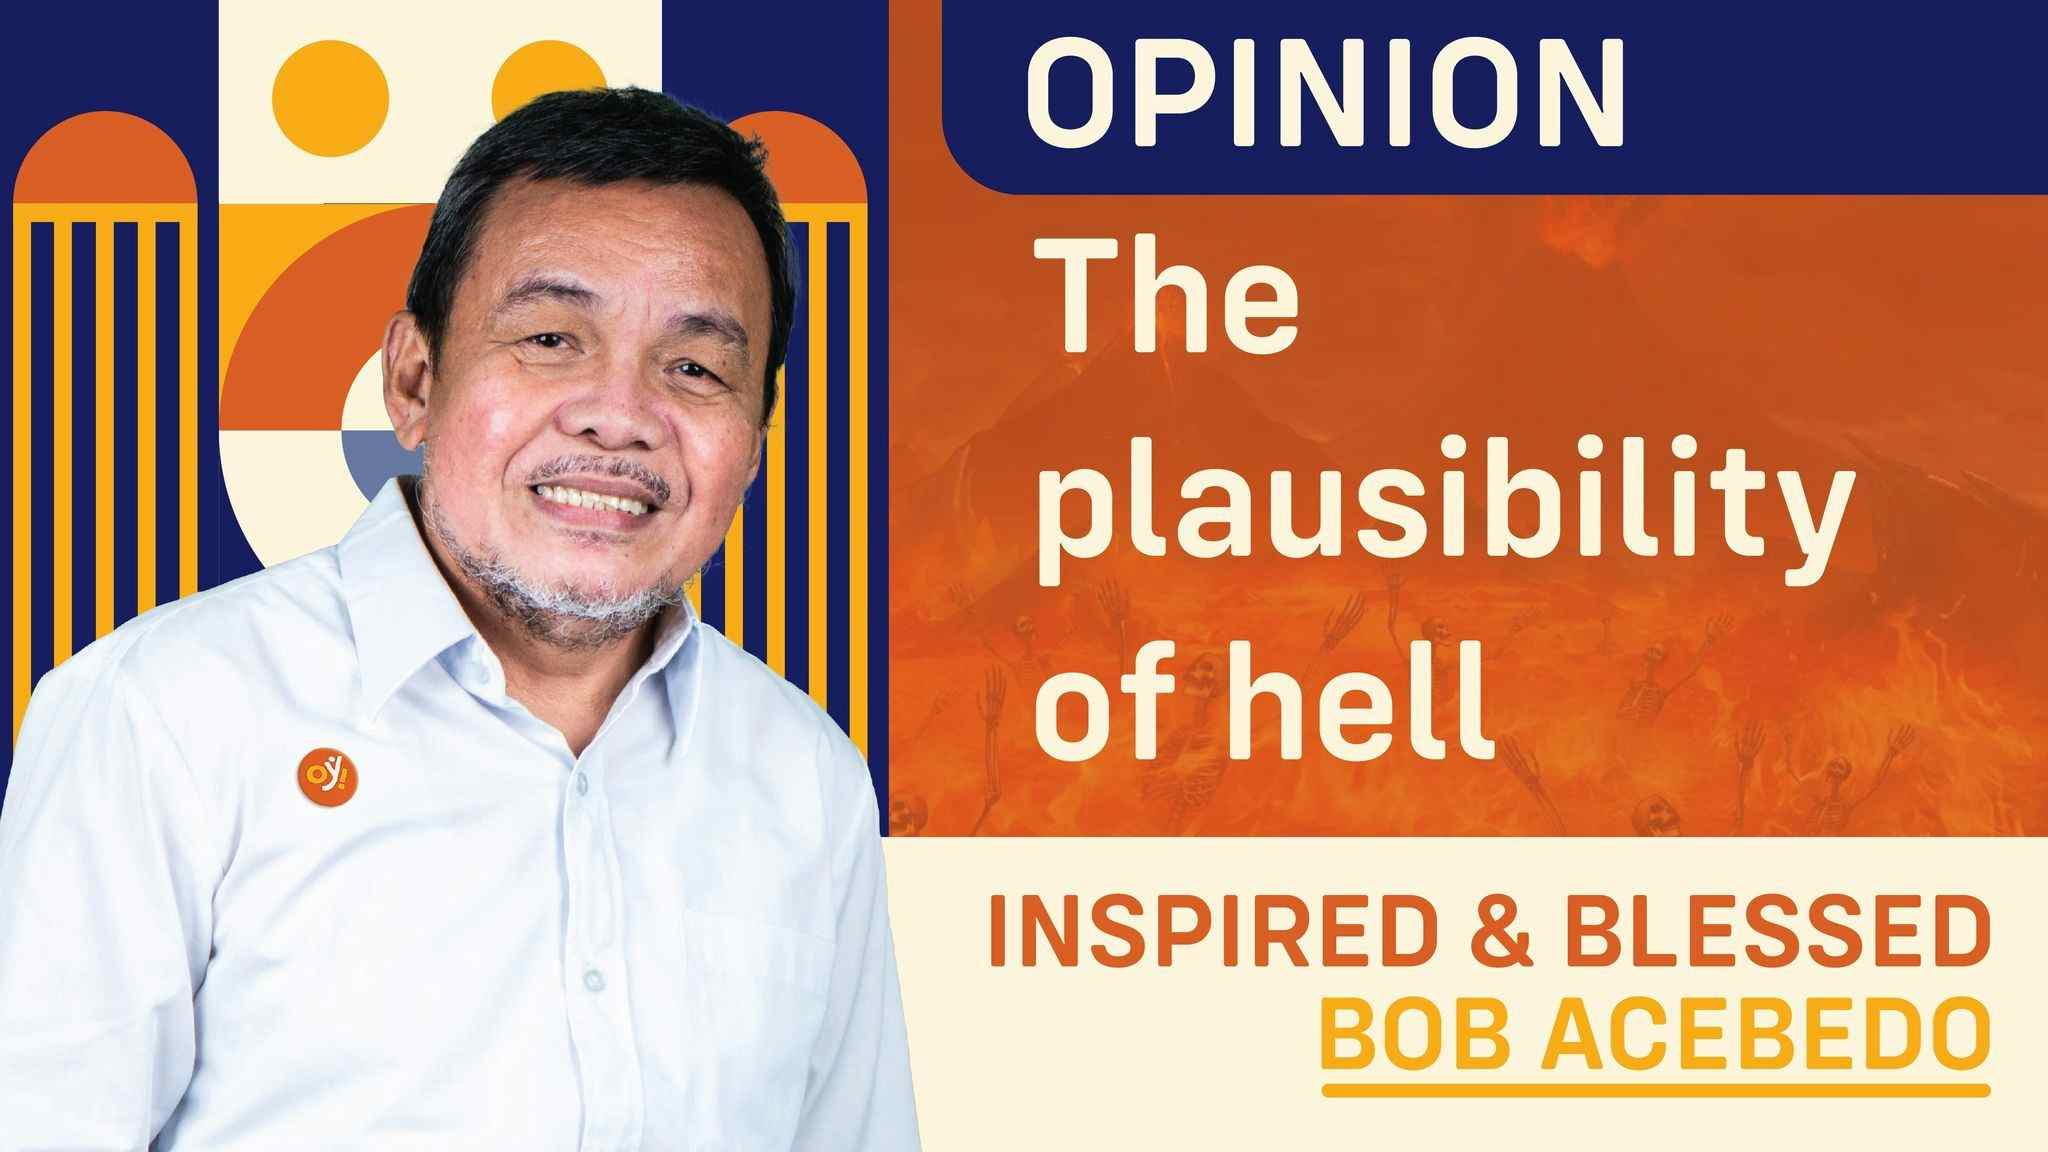 The plausibility of hell